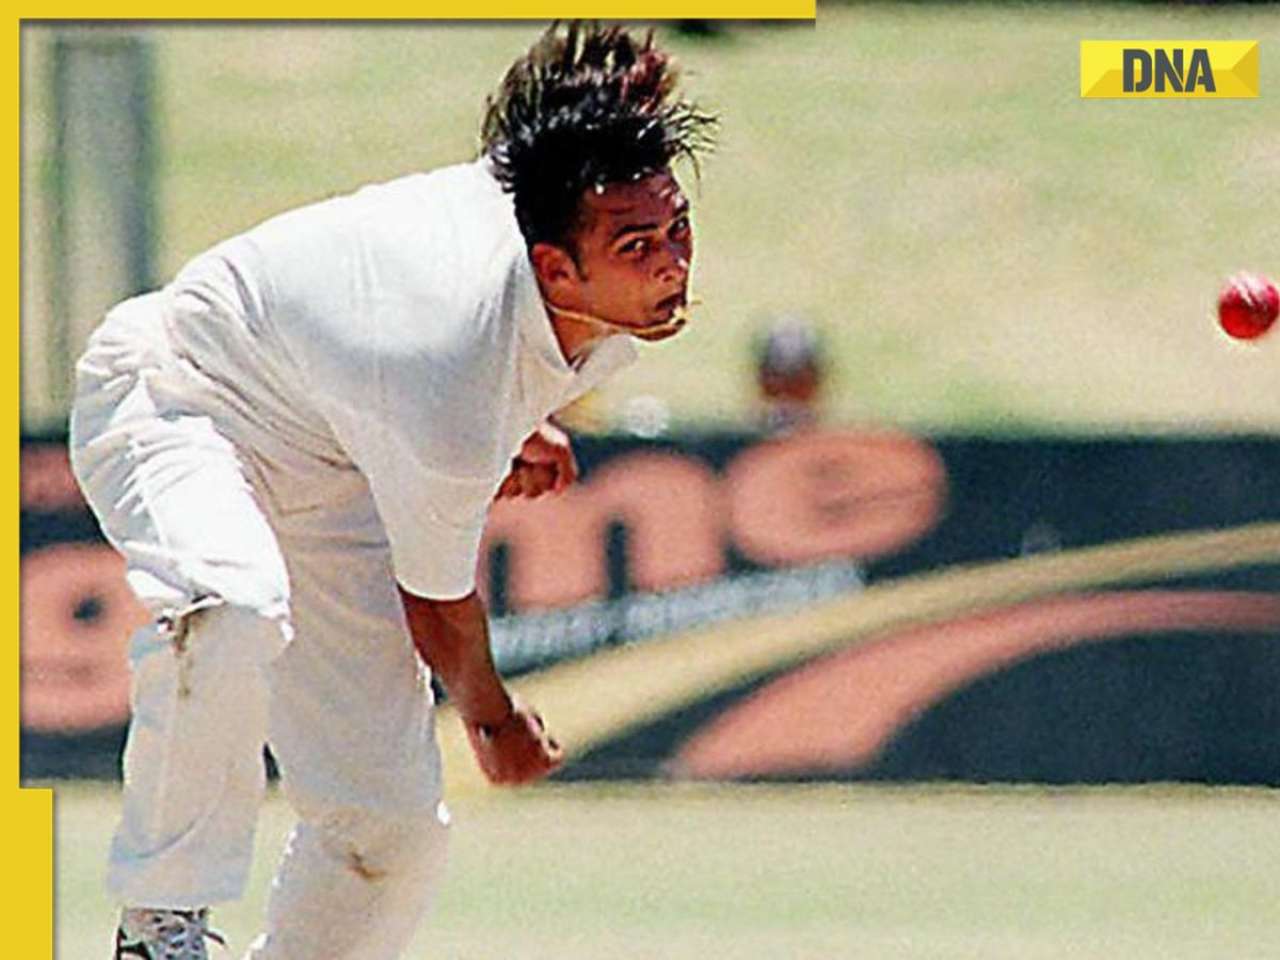 Bad news for Indian cricket as this former cricketer dies after falling from fourth floor